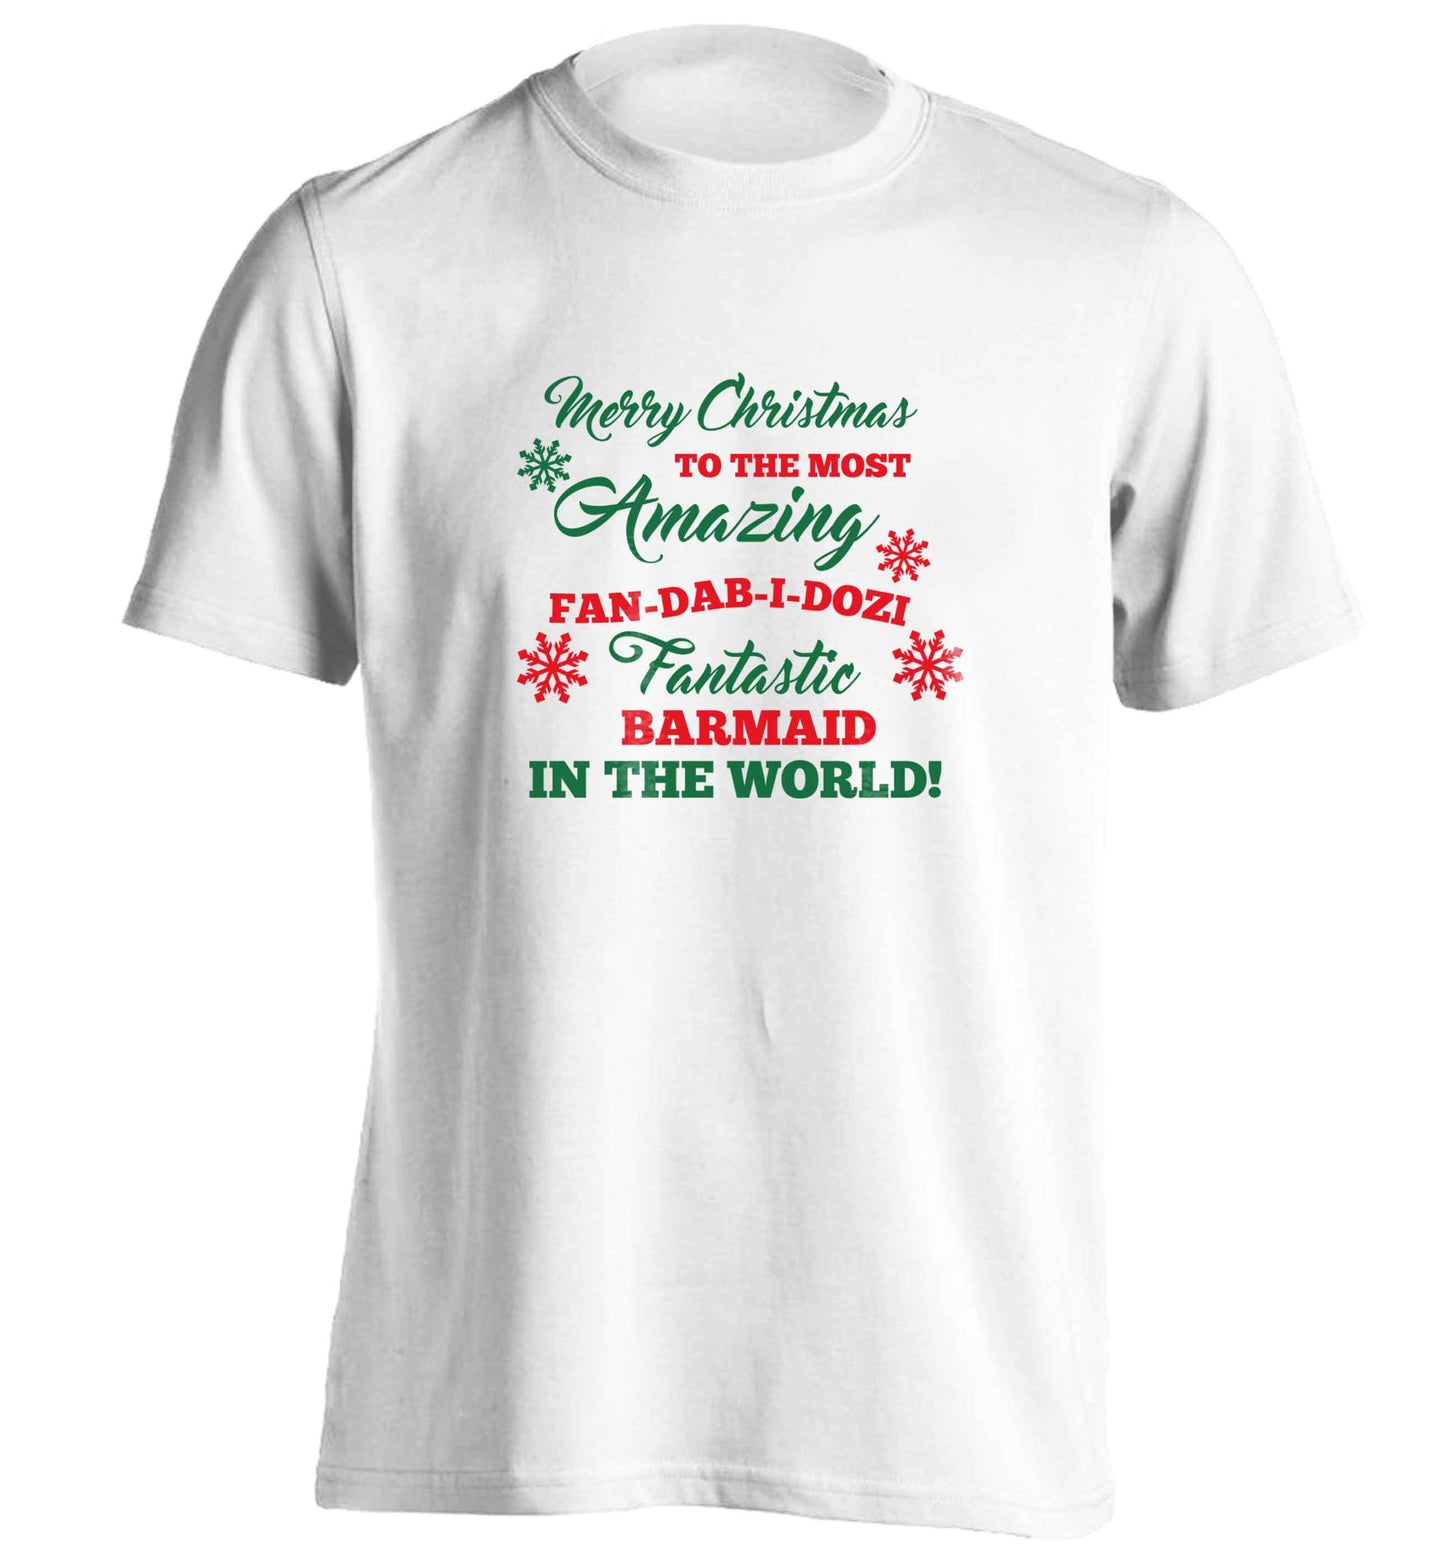 Merry Christmas to the most amazing barmaid in the world! adults unisex white Tshirt 2XL